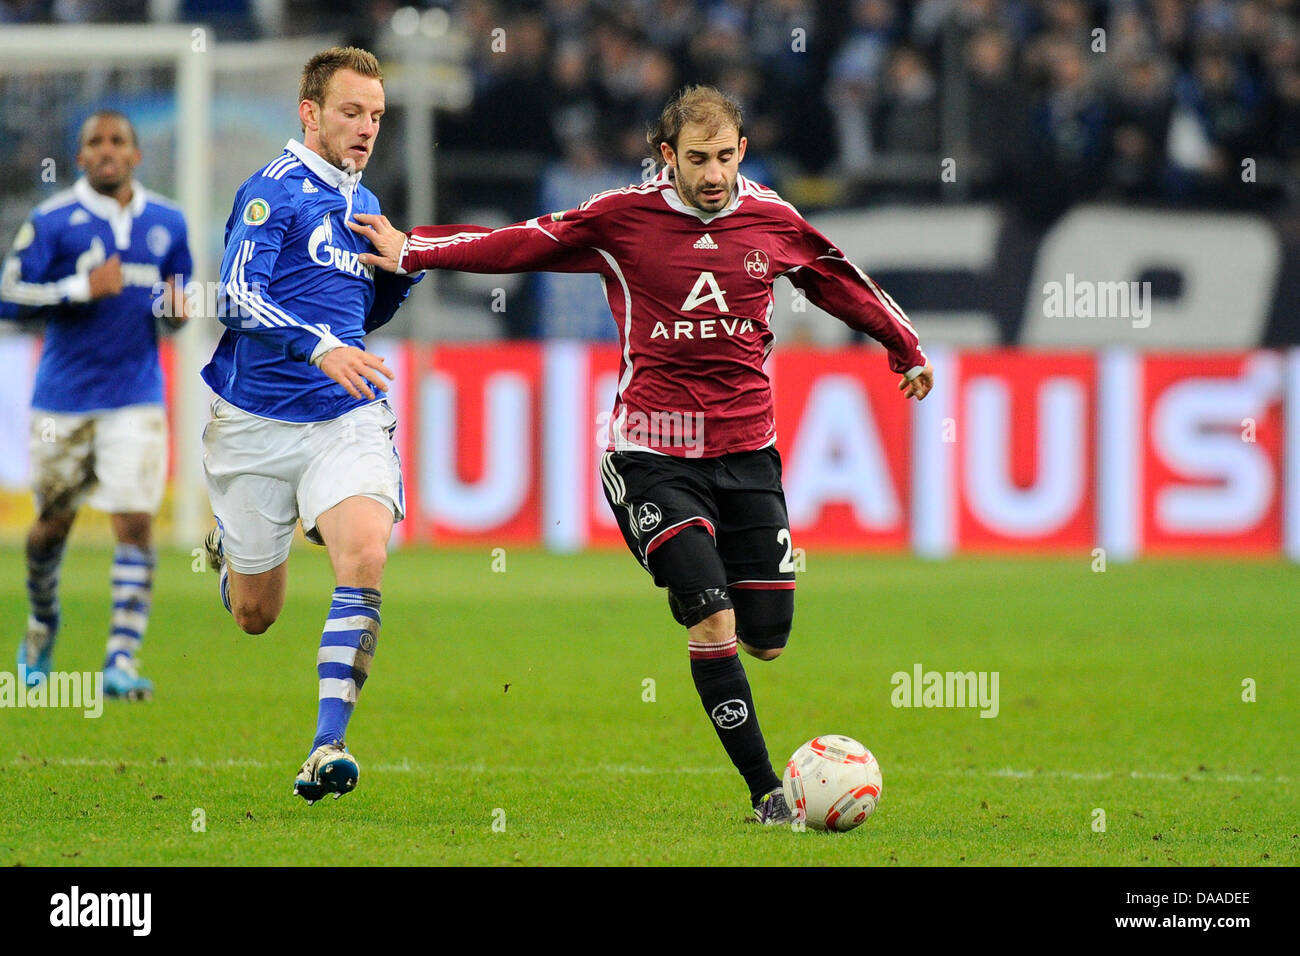 Schalke's Ivan Rakitic (L) and Nuremberg's Javier Pinola (L) vie for the ball during DFB Cup quarter-finals match FC Schalke 04 v 1.FC Nuremberg at Veltins Arena stadium in Gelsenkirchen, Germany, 25 January 2011. Schalke won the match with 3-2 after extra time. Photo: Revierfoto Stock Photo